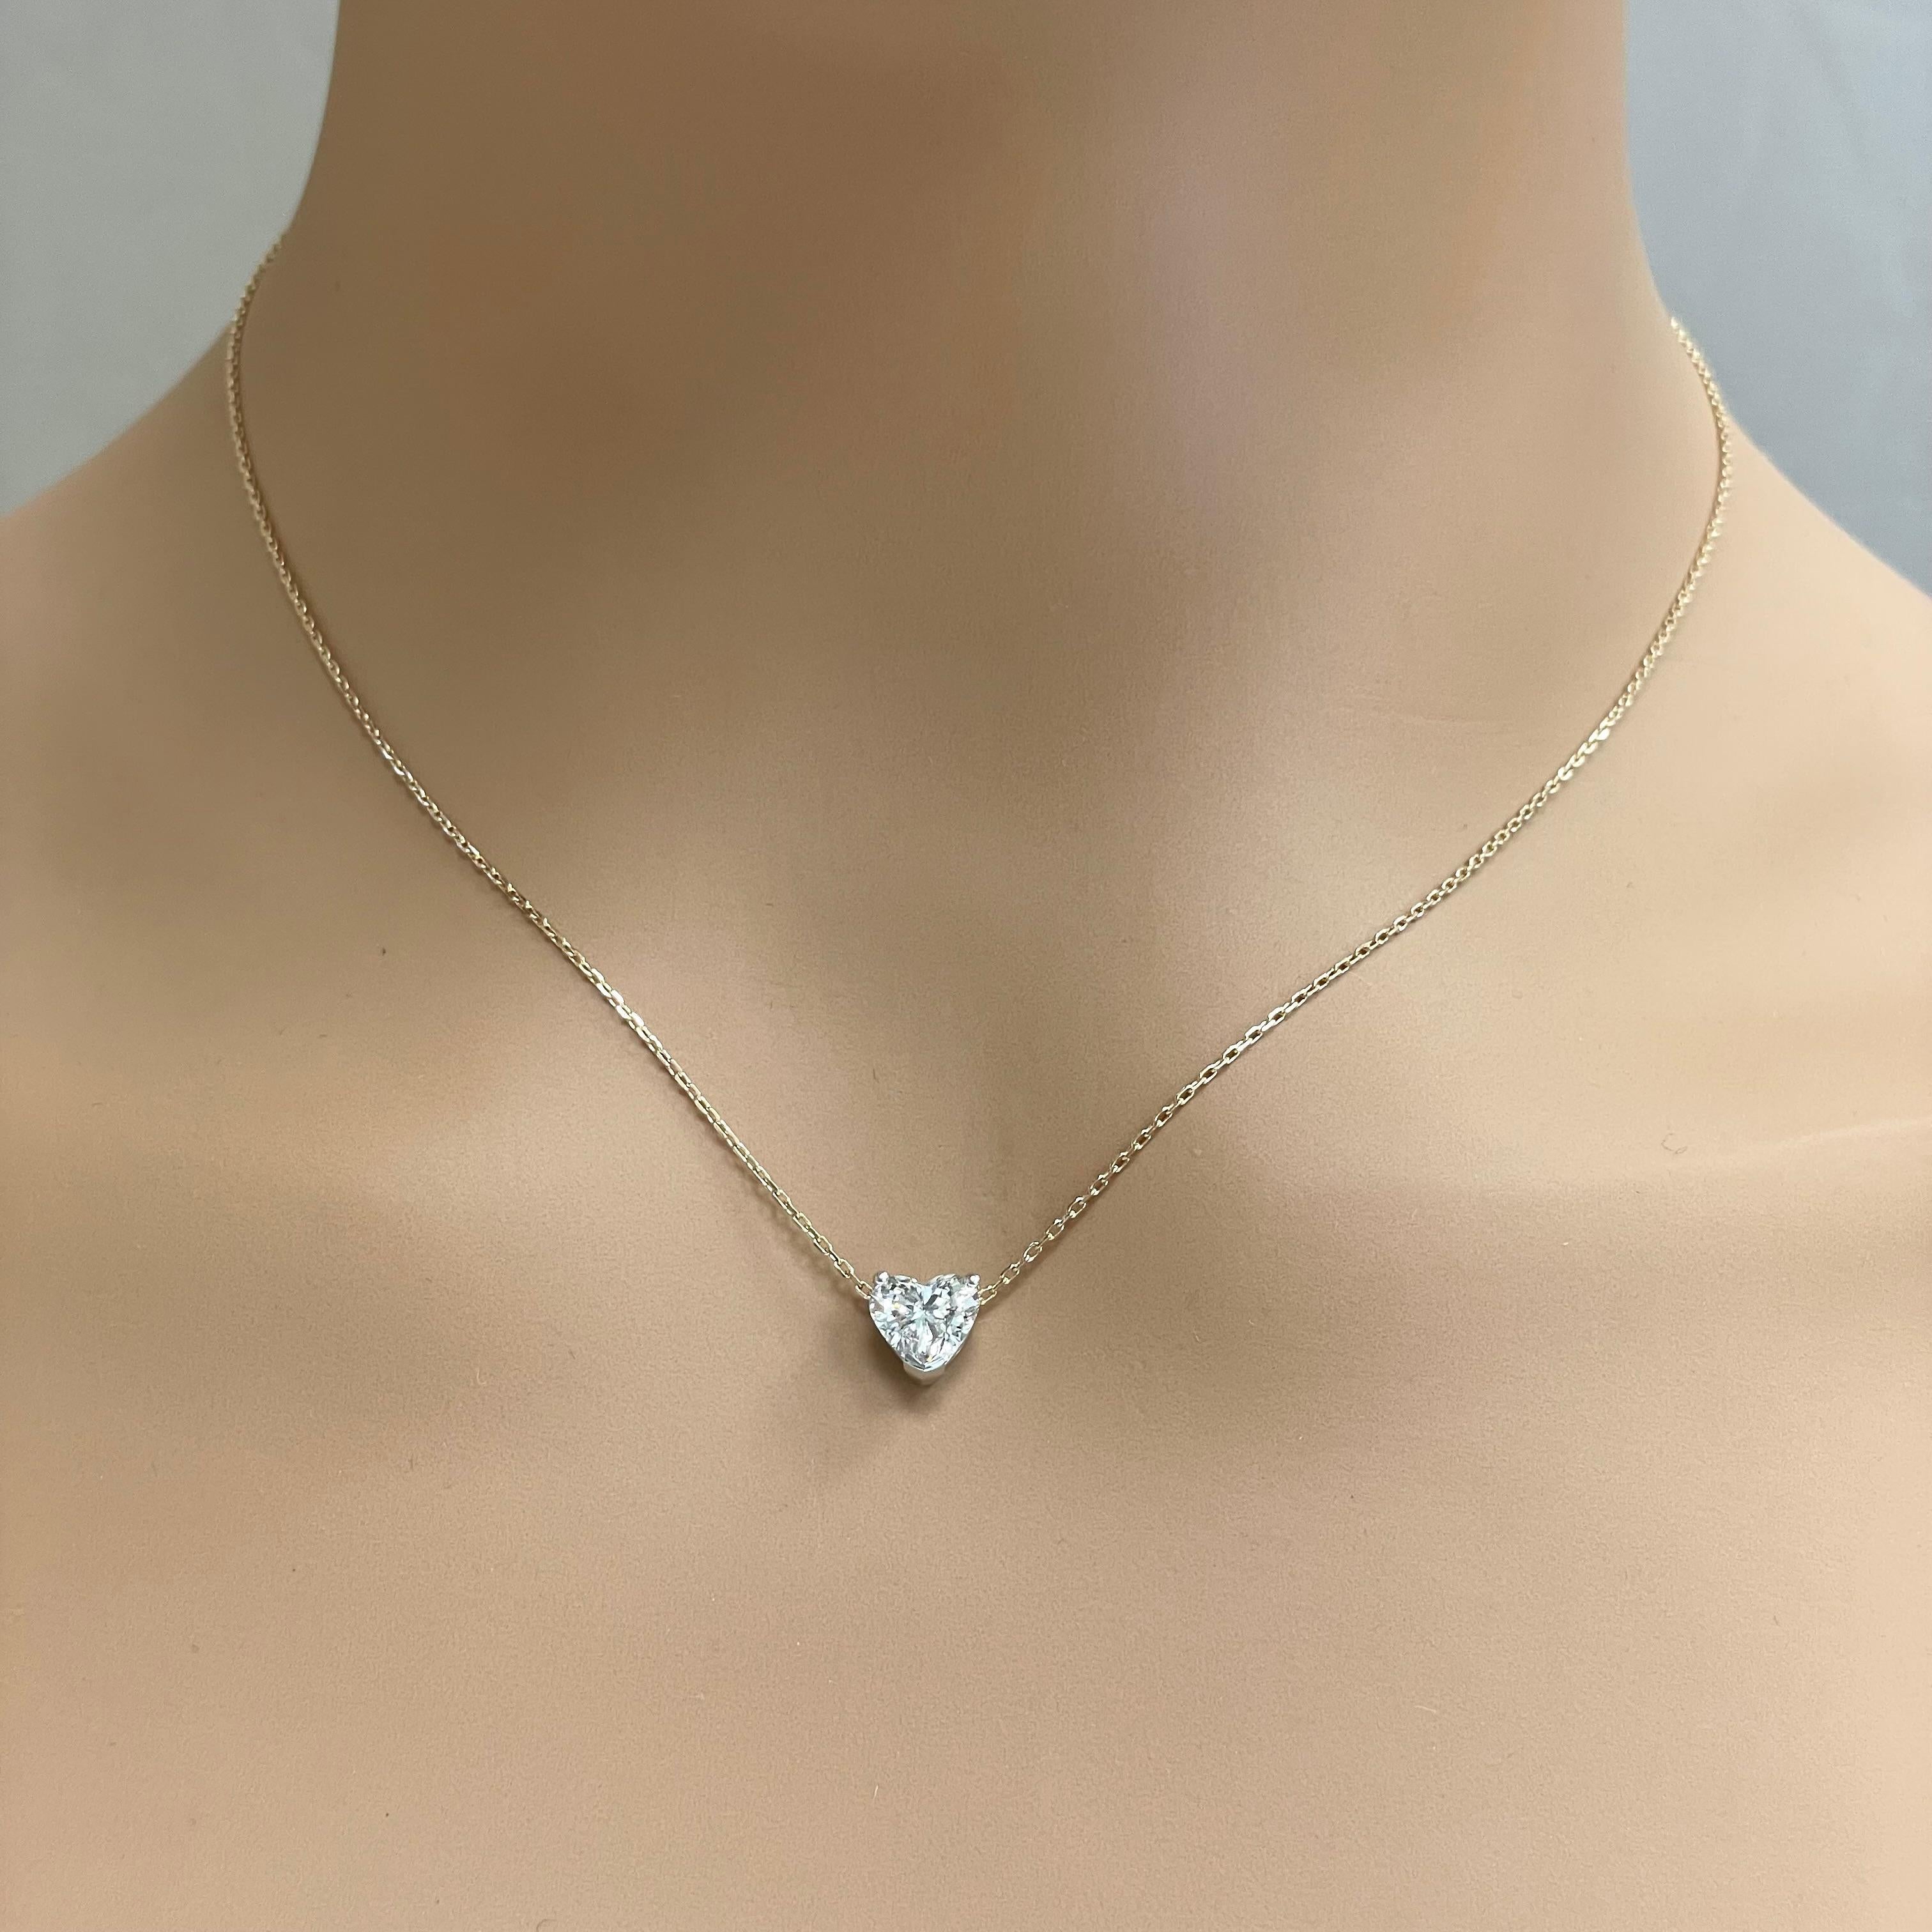 A gorgeous Heart Shaped Diamond Pendant in a white gold setting with rose gold chain. This lovely diamond measures larger than its size to give you that extra bang for your buck.

Center Diamond Shape: Heart Shape
Center Diamond Weight: 1.01 ct